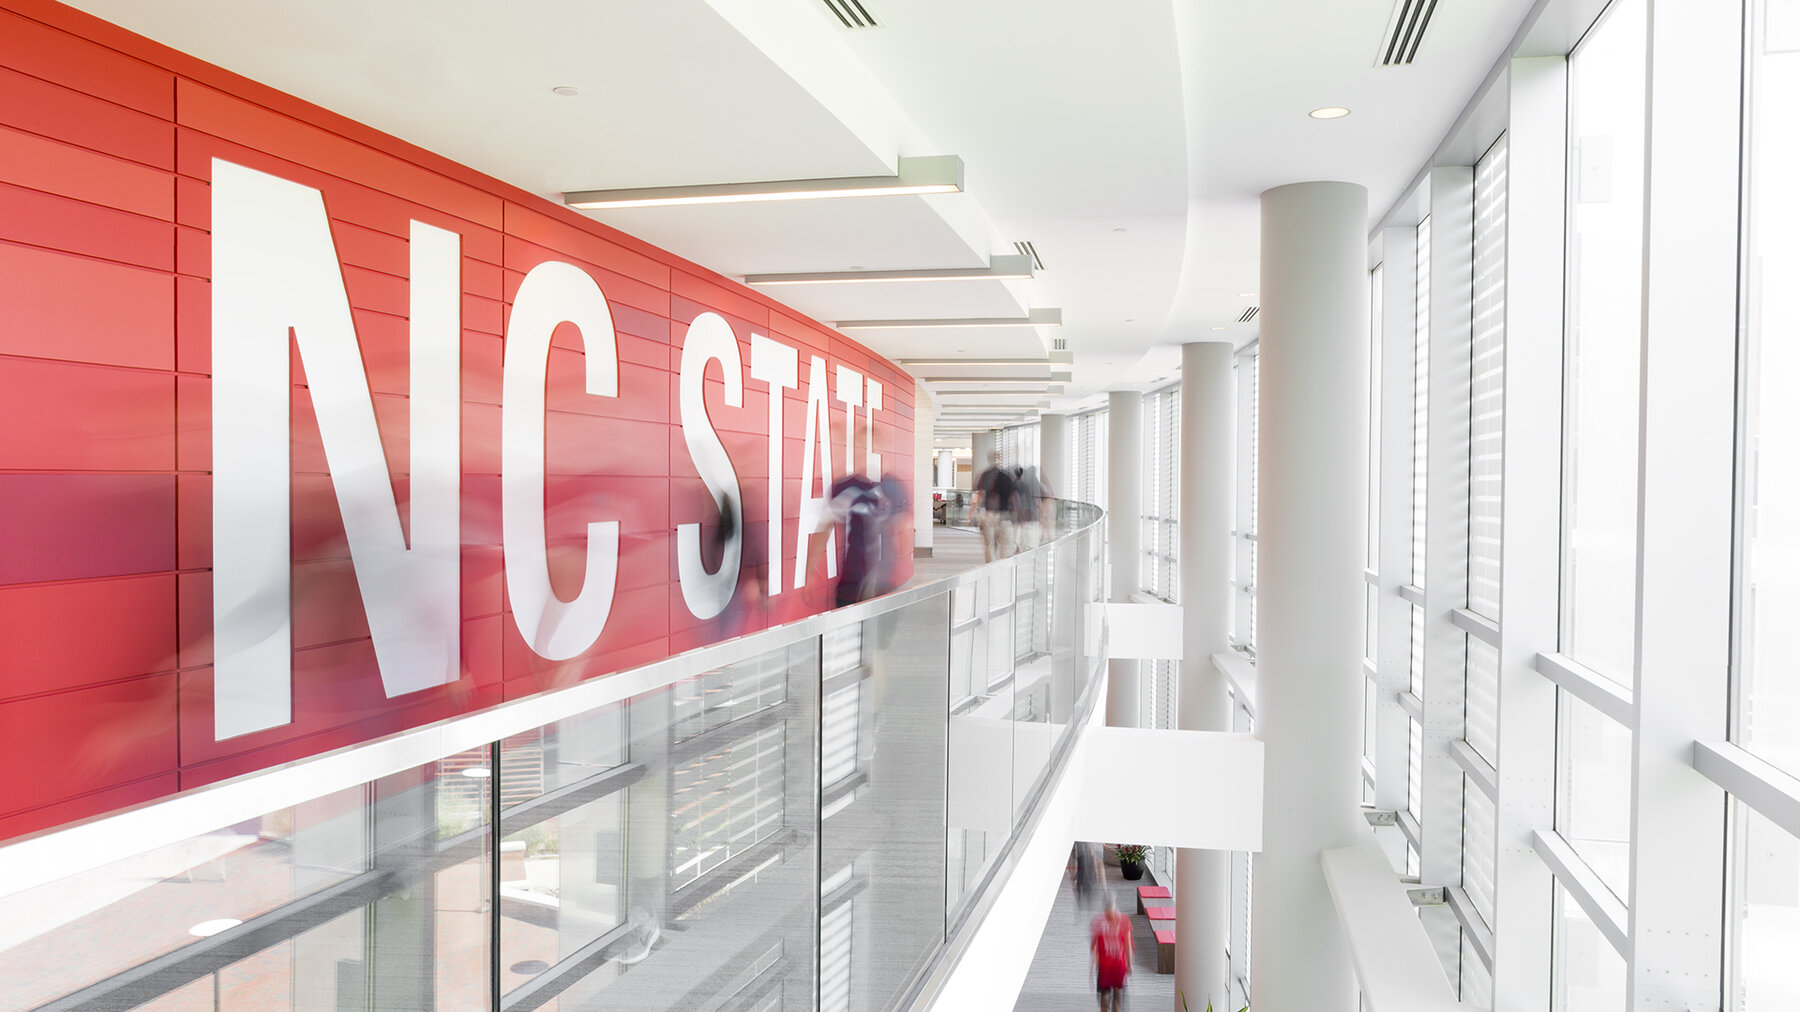 Nc state background image 1